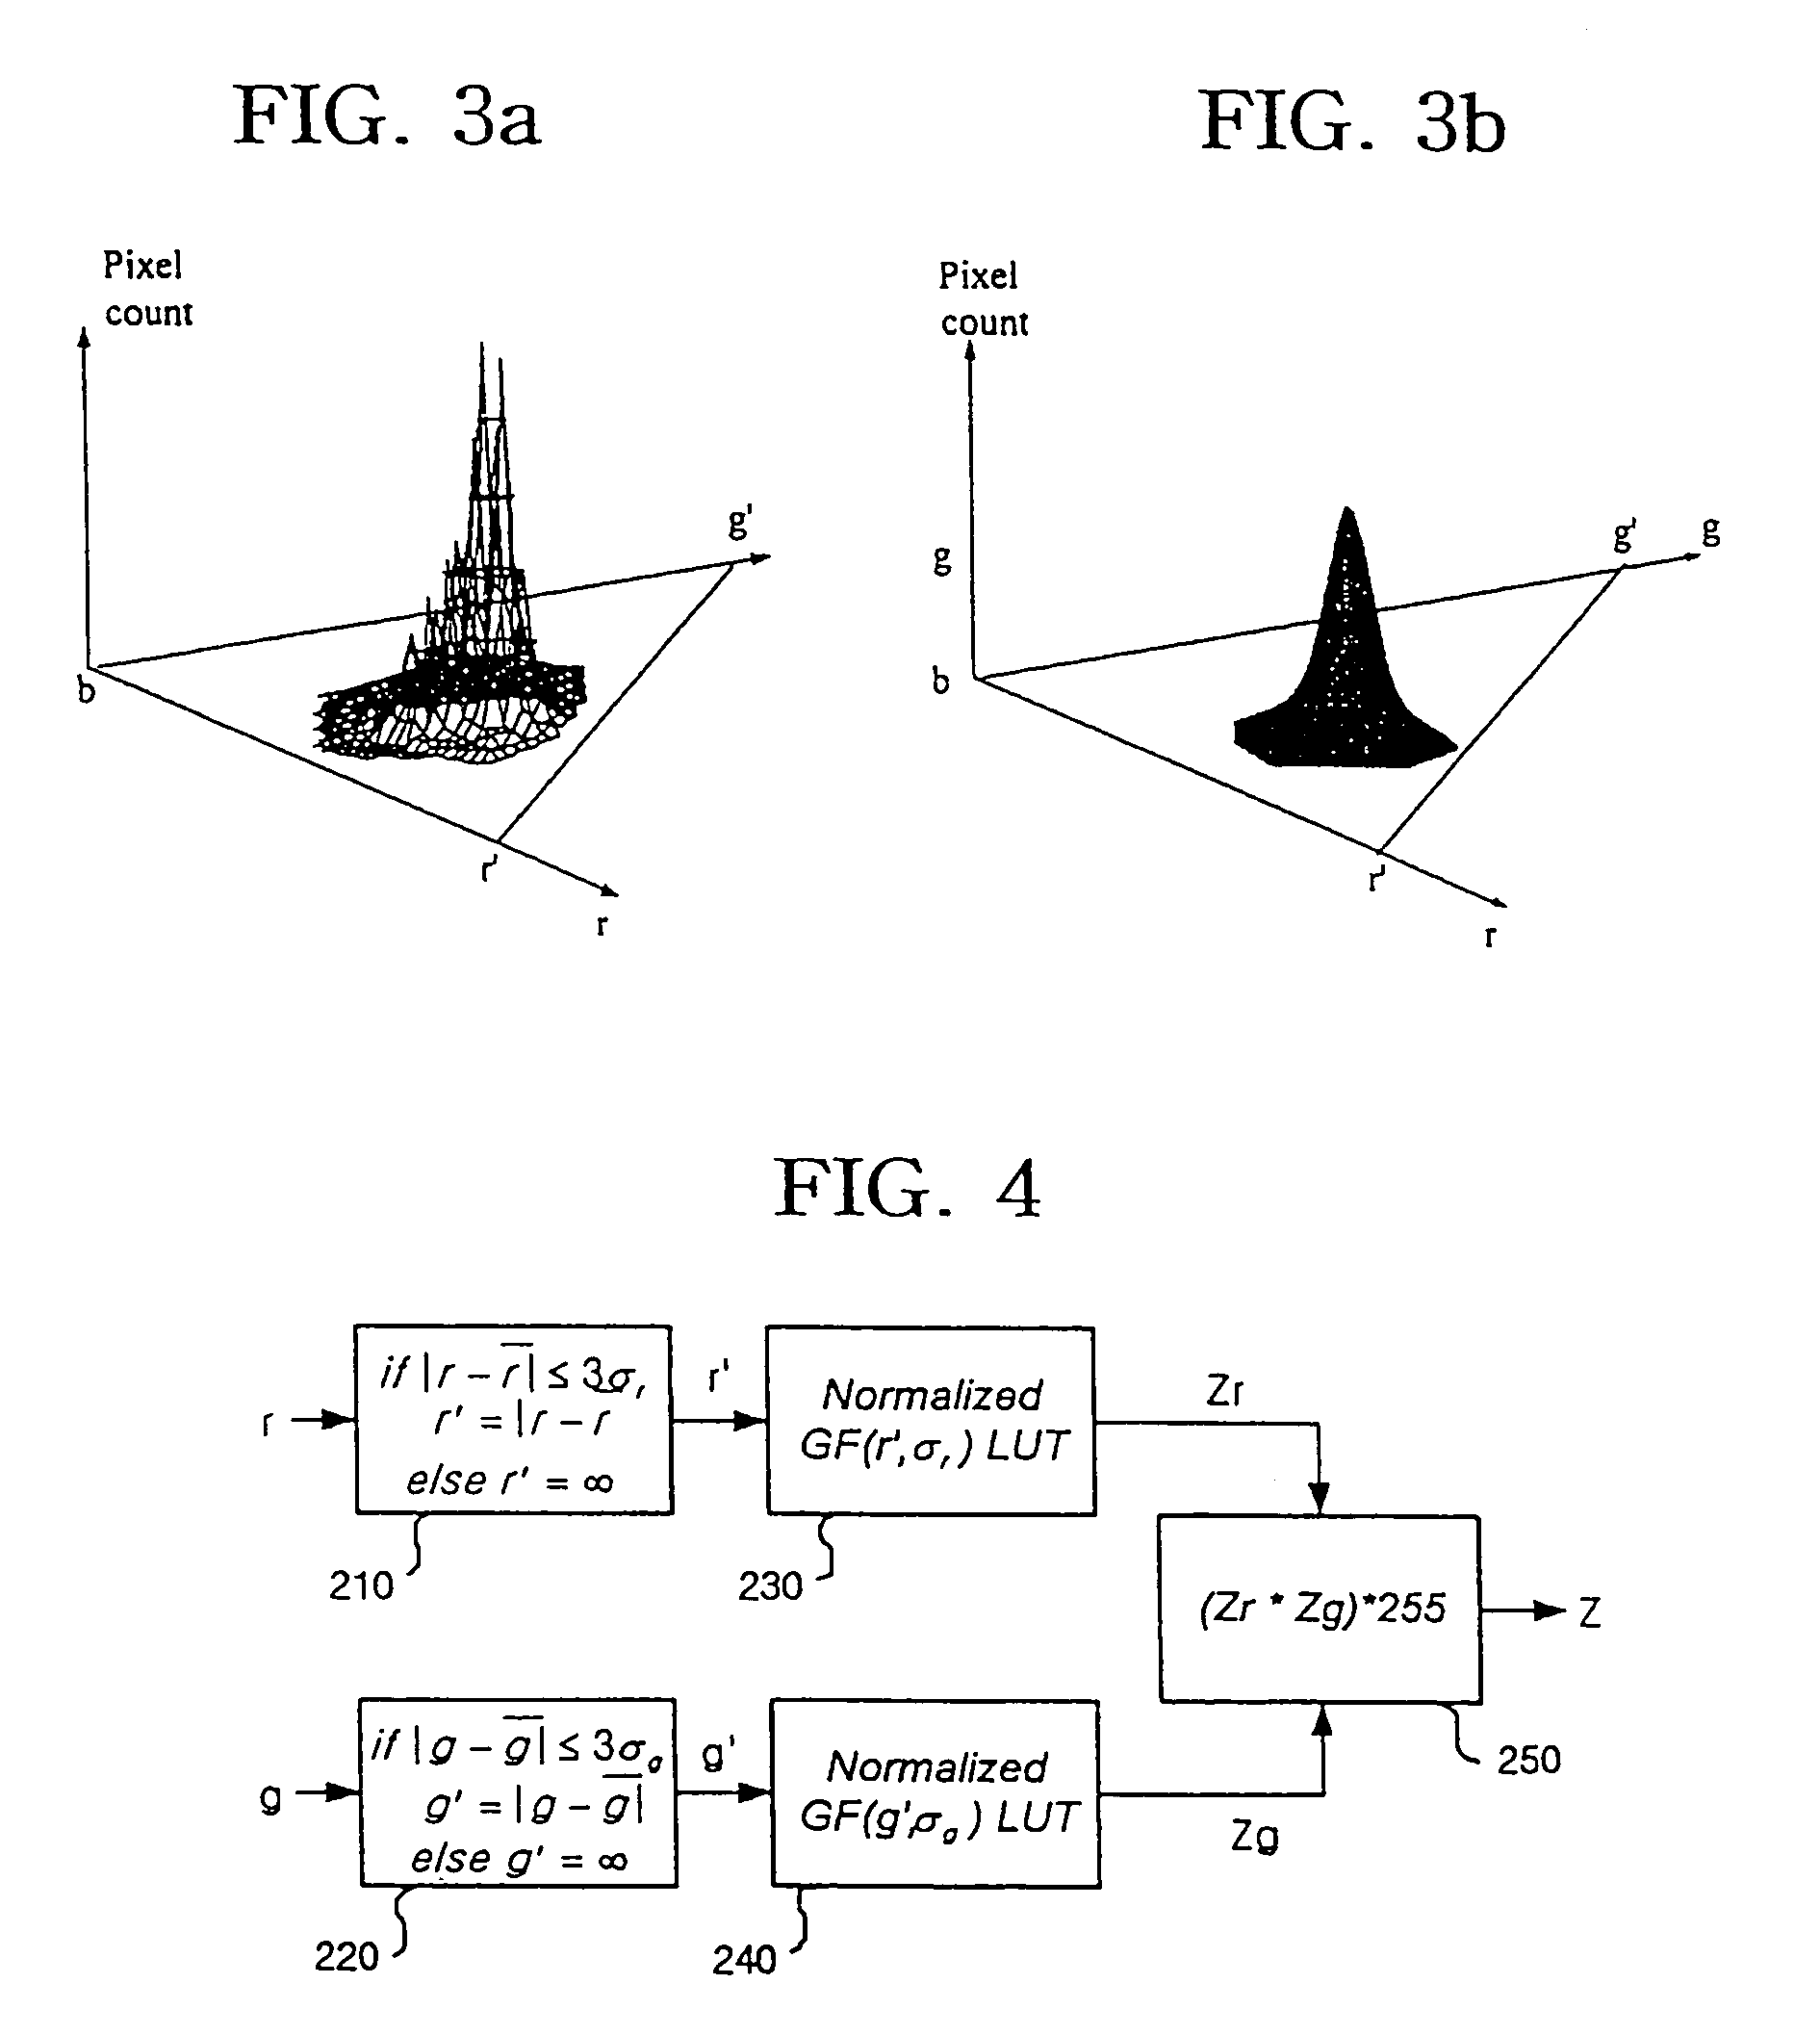 Apparatus and method for detecting a moving object in a sequence of color frame images